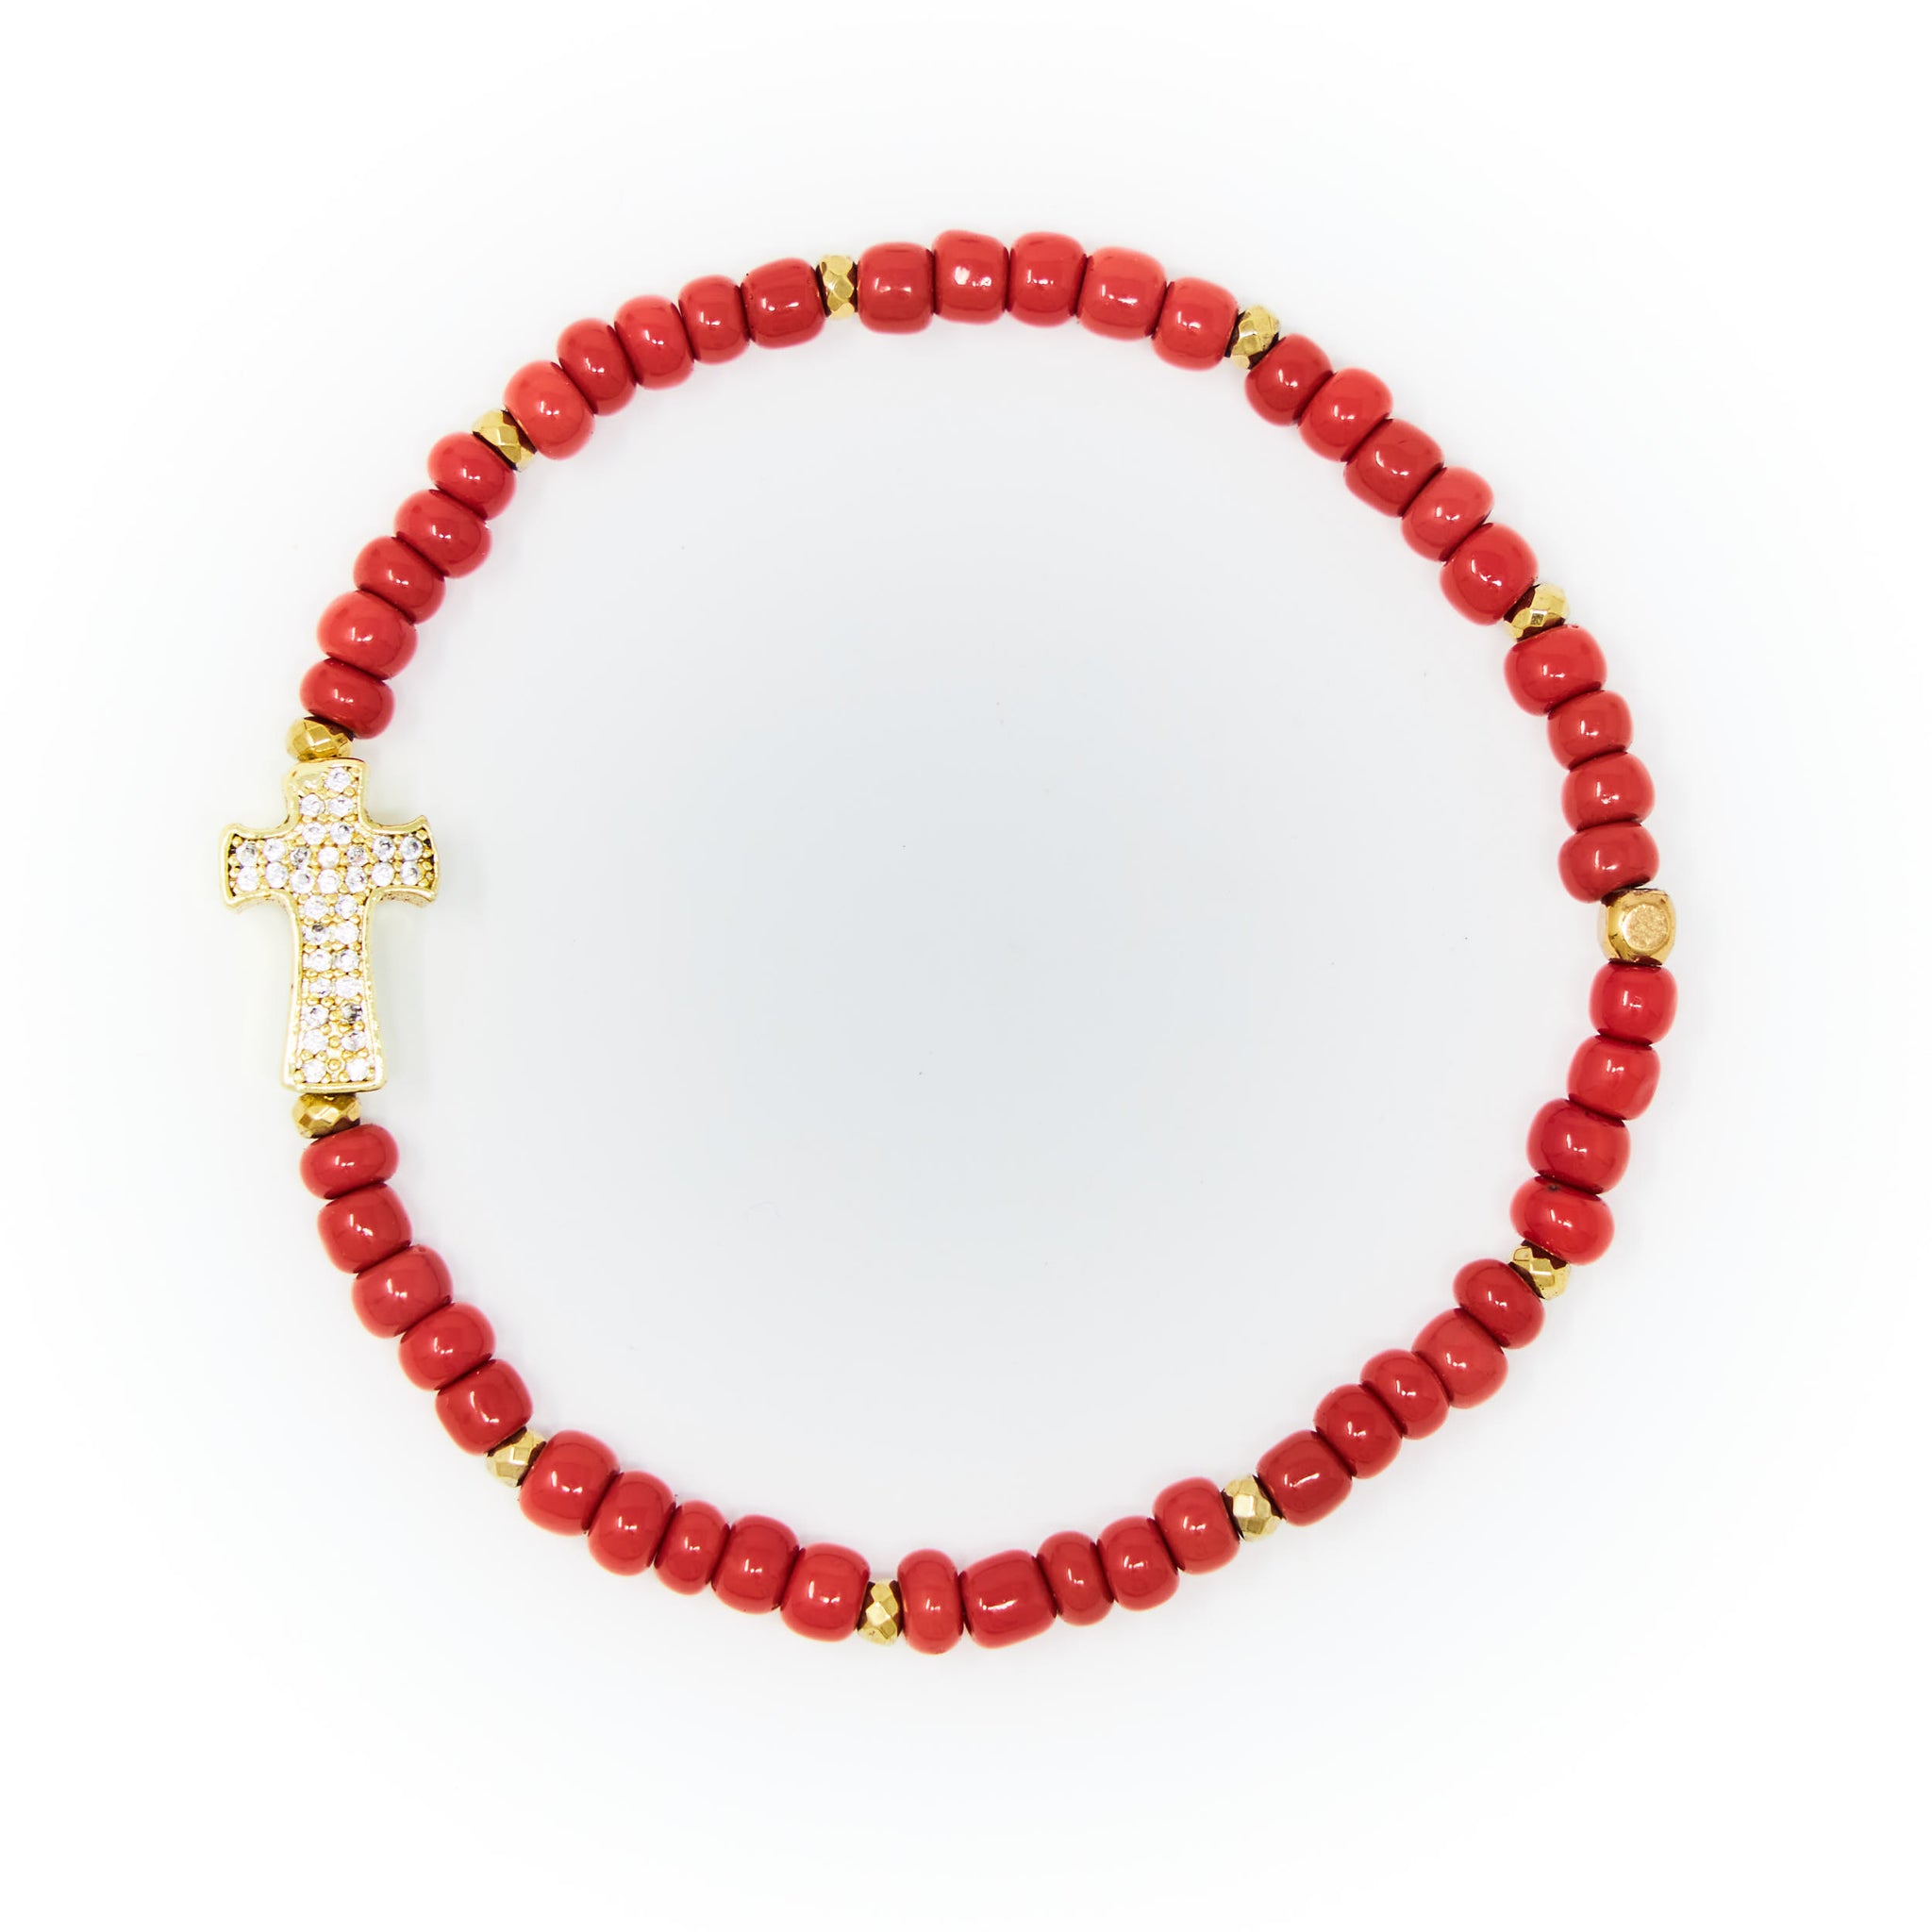 Red Sand Beads with Gold Bracelet, Cross Charm with Clear Zirconia